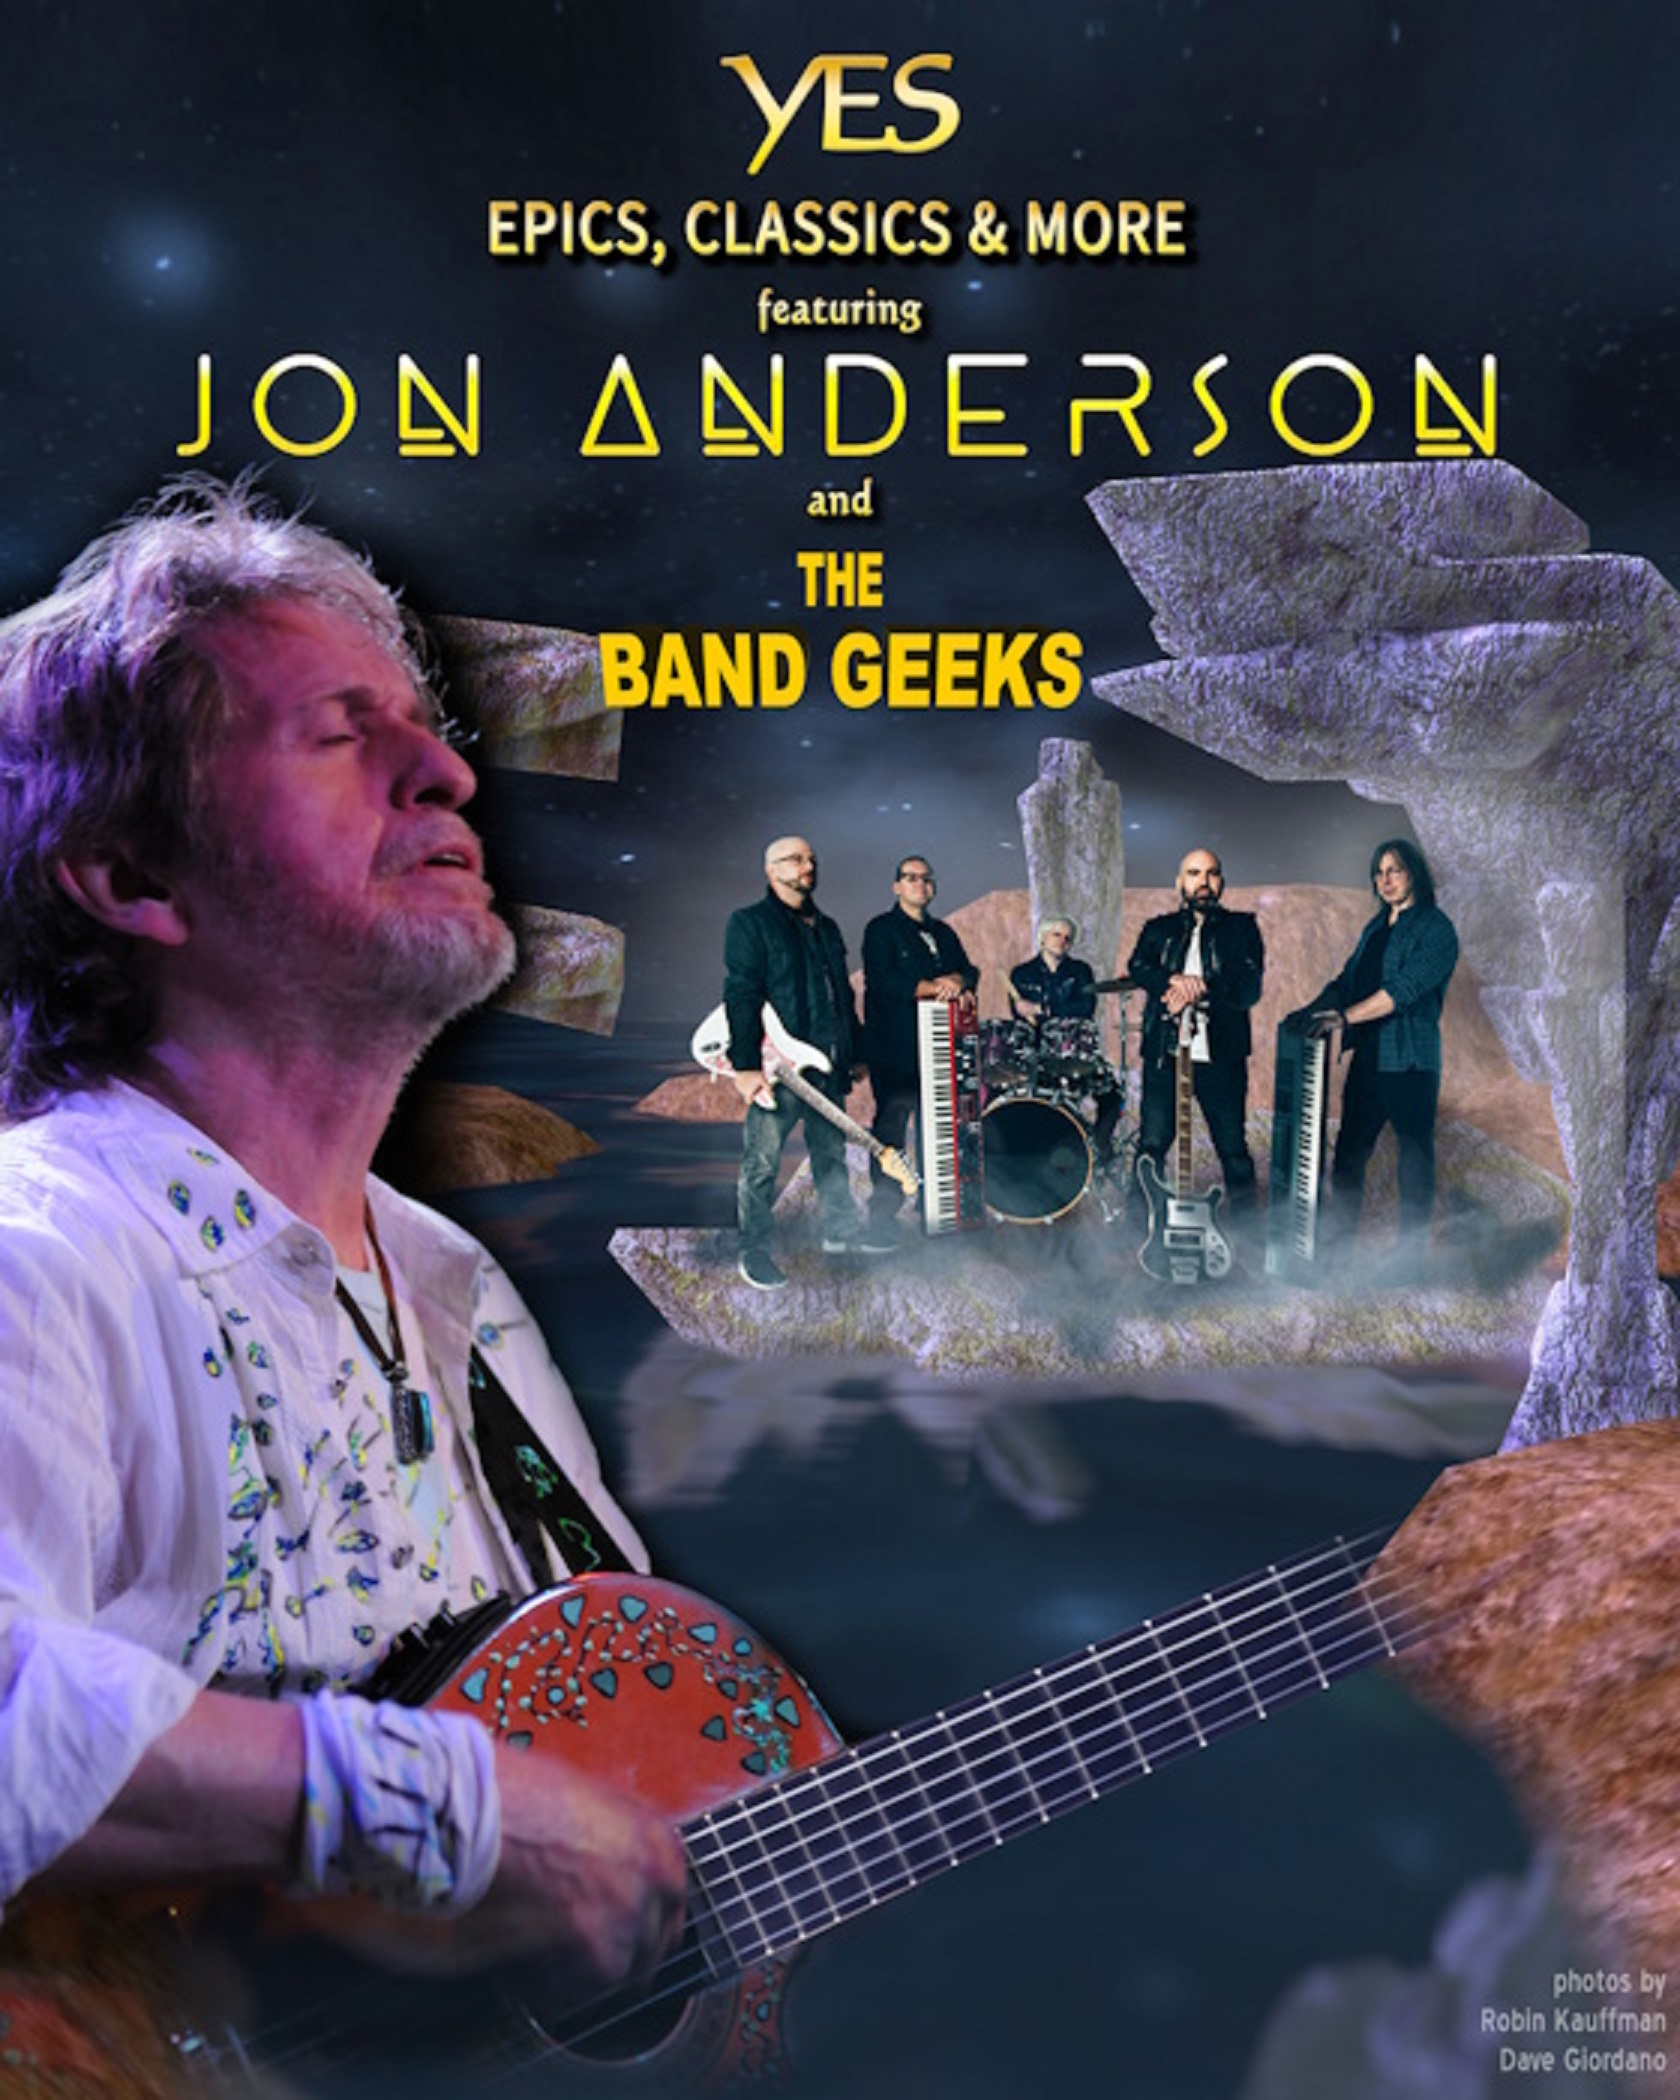 Jon Anderson and The Band Geeks Premiere “Shine On” Video, New Album “TRUE” Available For Preorder